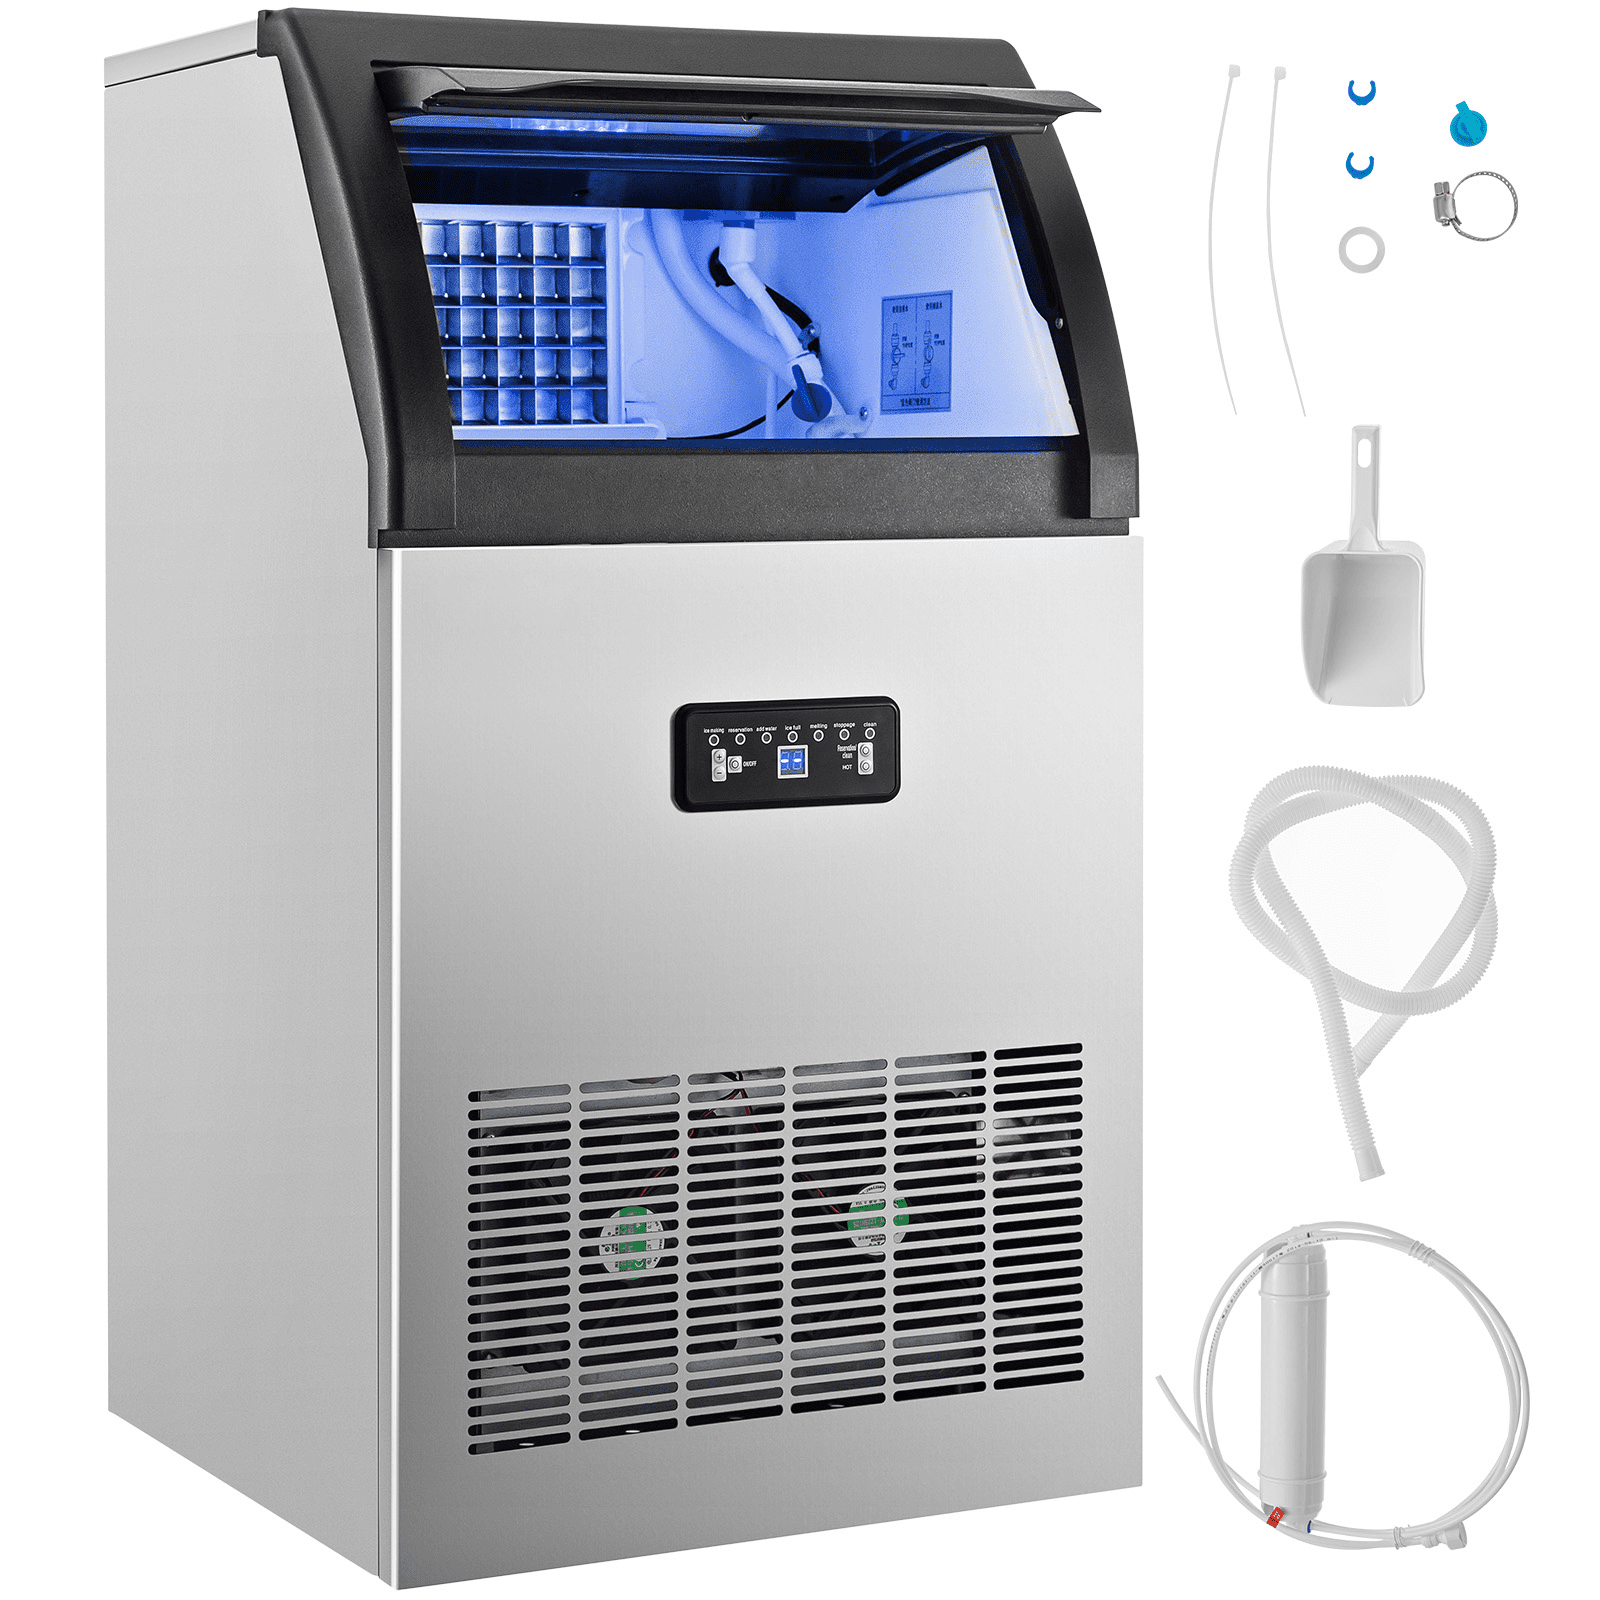 Commercial Ice Maker Industrial Ice Machine 350LBS/24H Capacity 200LBS Storage LCD Panel SECOP Compressor ETL Approval 